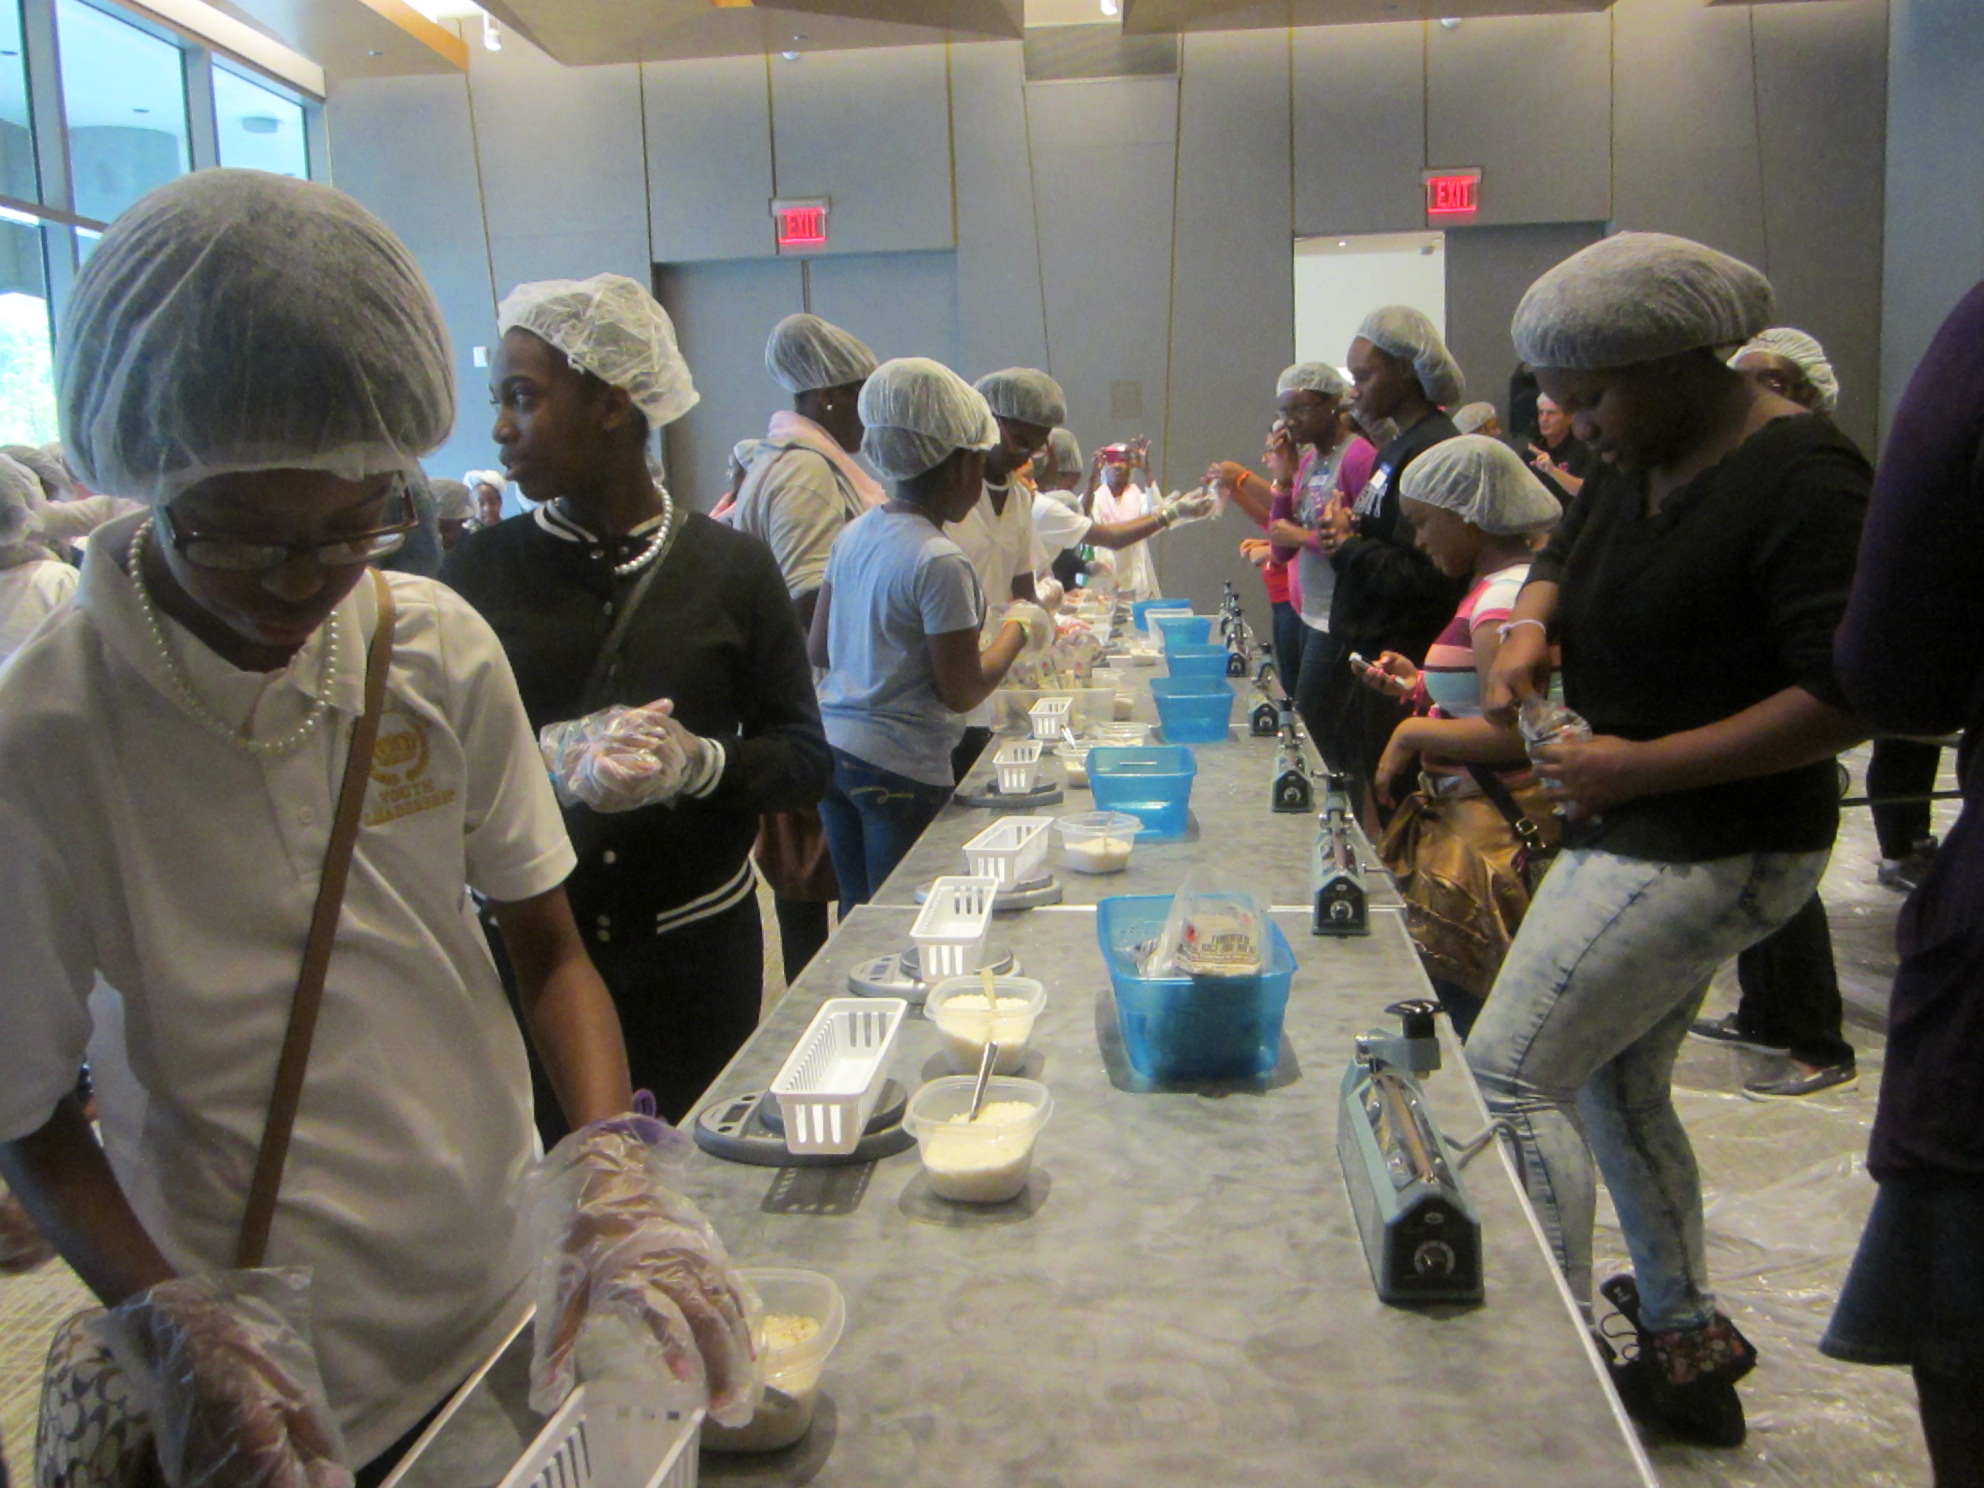 Participants had the opportunity to help Stop Hunger Now package more than 9,000 meals.